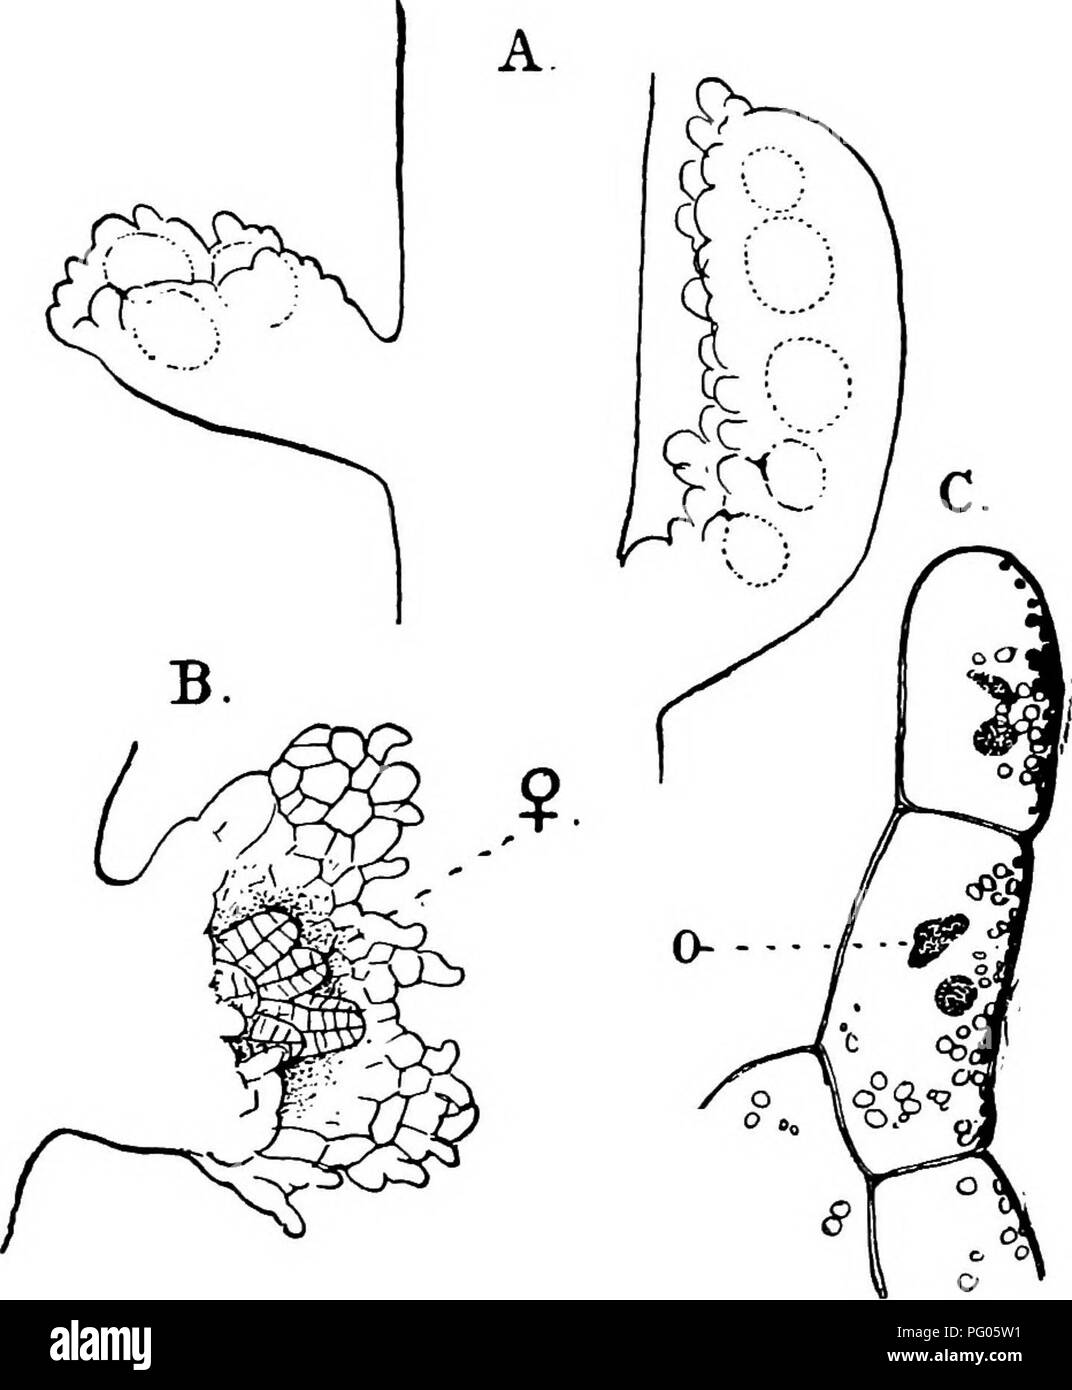 . The structure and development of mosses and ferns (Archegoniatae). Plant morphology; Mosses; Ferns. Ill THE JUN GERM AN NI ALES 87 the formation of a second apical cell in one of the youngest segments. This apical cell is formed by a curved wall, which strikes the outer wall of the segment (Fig. 37, C). Thus two apical cells arise close together, and as segments are cut off from each, they are forced farther and farther apart, and serve as the growing point of two shoots, which may continue. Fig. ig.—Aneura pinnatiUda. A, Part of a thallus with two antheridial branchts. slightly magnified; B Stock Photo